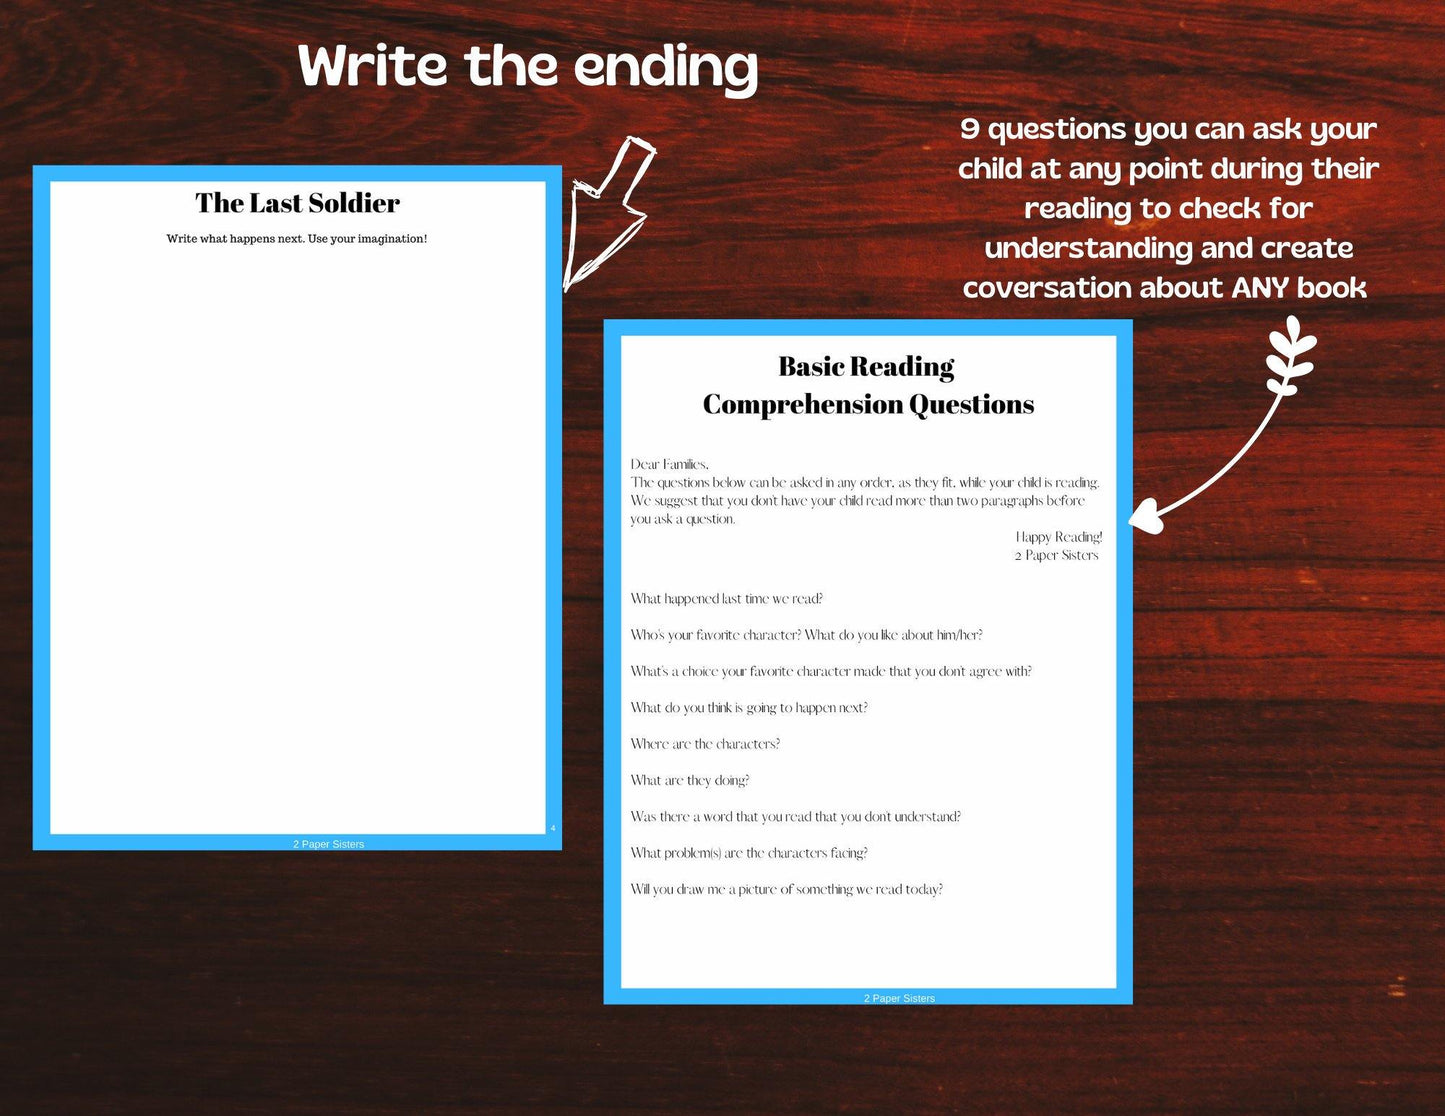 Reading Comprehension: The Last Soldier, Ages 7-12 - Digital Download - 2 Paper Sisters